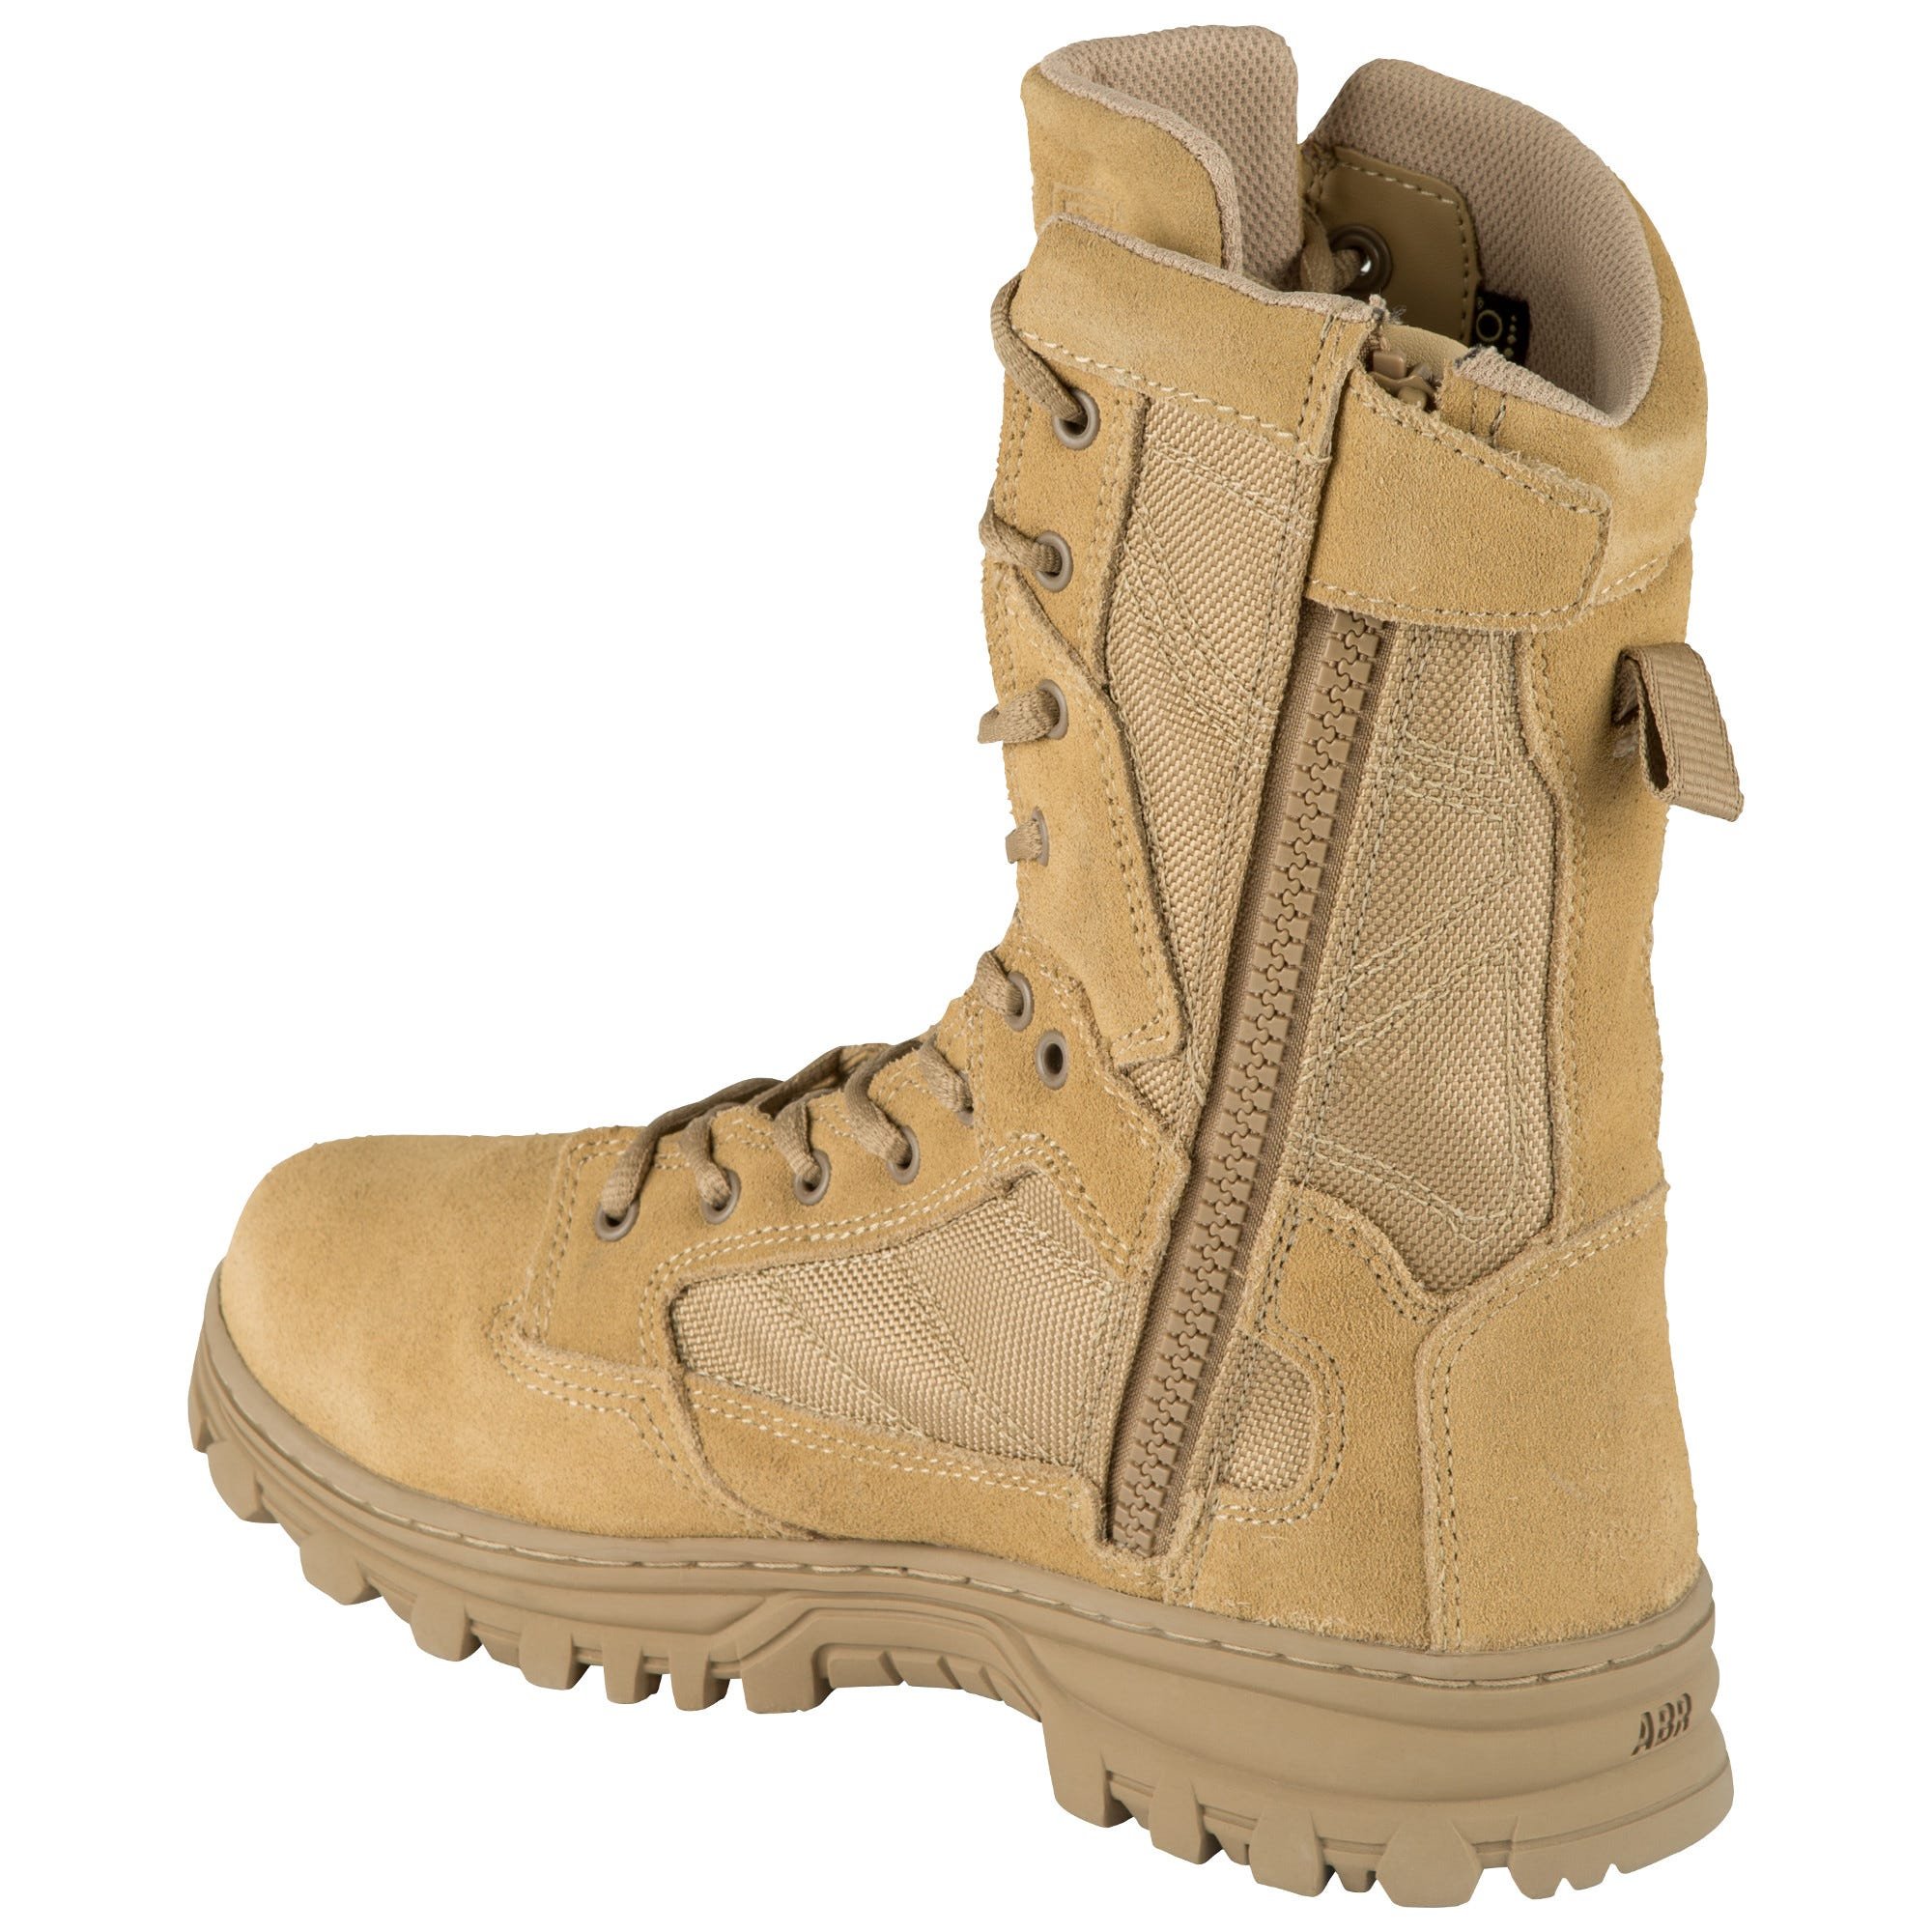 5.11 Work Gear EVO 8-Inch Waterproof Boots, Oil/Slip-Resistant, OrthoLite Insole, Coyote, 4/Regular, Style 12347 - image 2 of 4